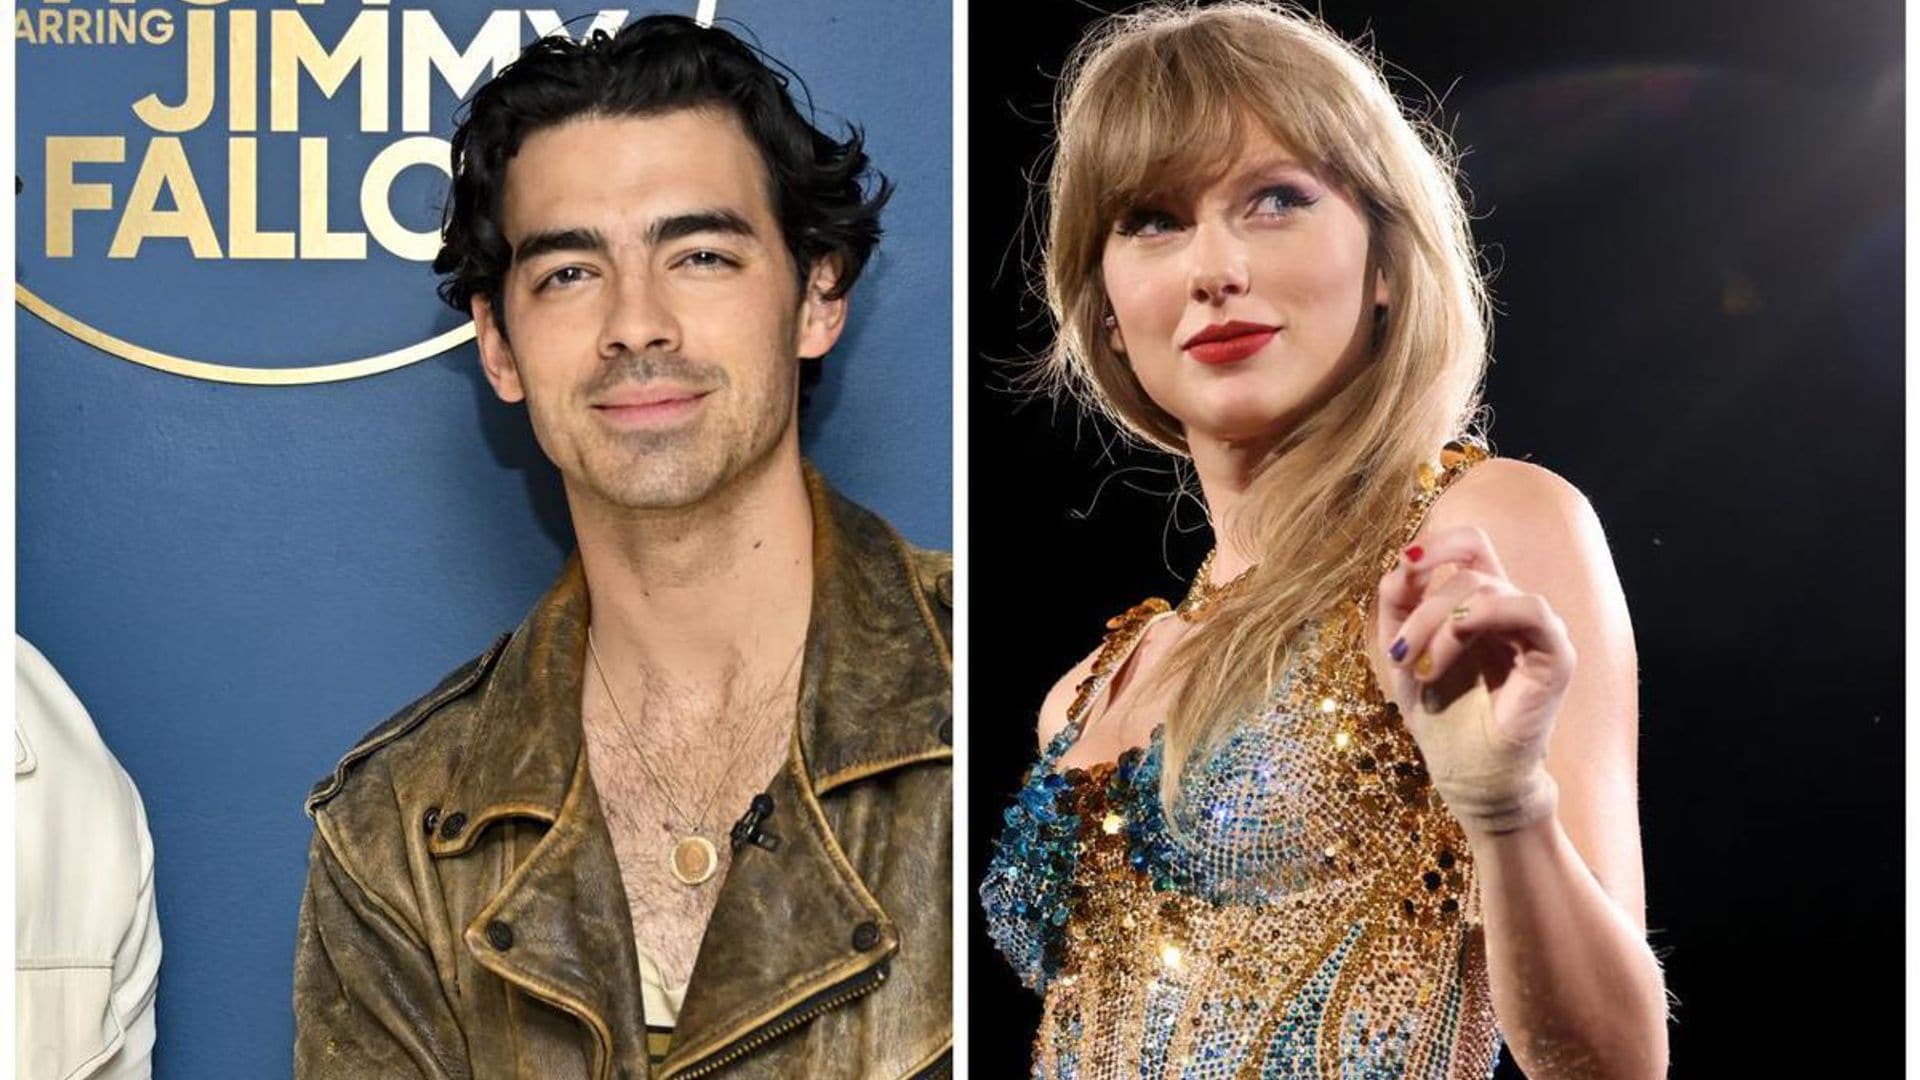 Joe Jonas has something to say about his previous romance with Taylor Swift